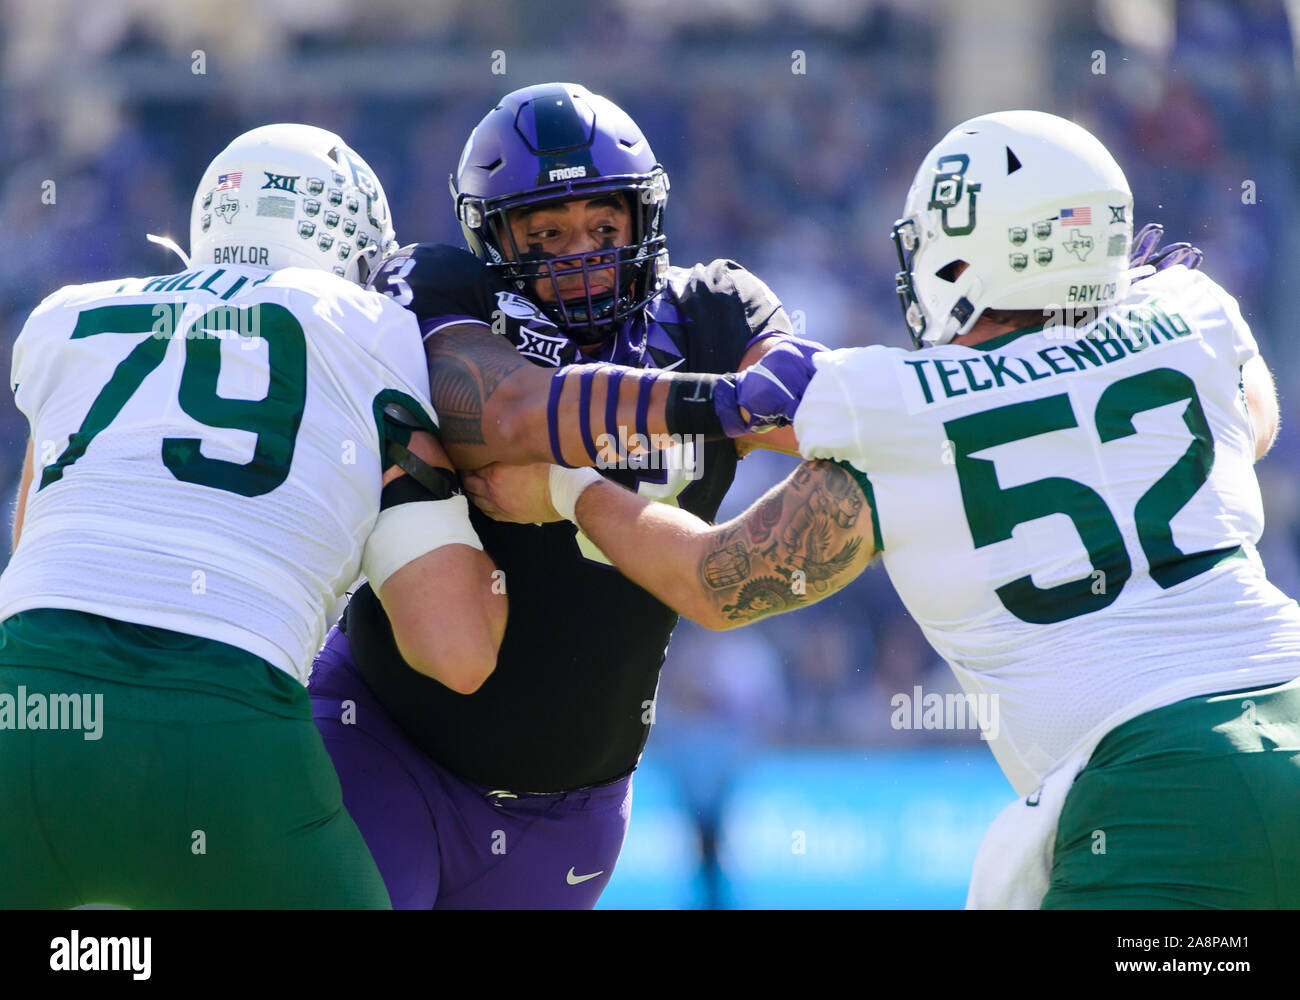 November 9 2019: TCU Horned Frogs defensive tackle Izaih Filikitonga (43) rushes against Baylor Bears offensive lineman Sam Tecklenburg (52) and Baylor Bears offensive lineman Casey Phillips (79) during the 1st half of the NCAA Football game between Baylor Bears and the TCU Horned Frogs at Amon G. Carter stadium in Fort Worth, Texas. Matthew Lynch/CSM Stock Photo